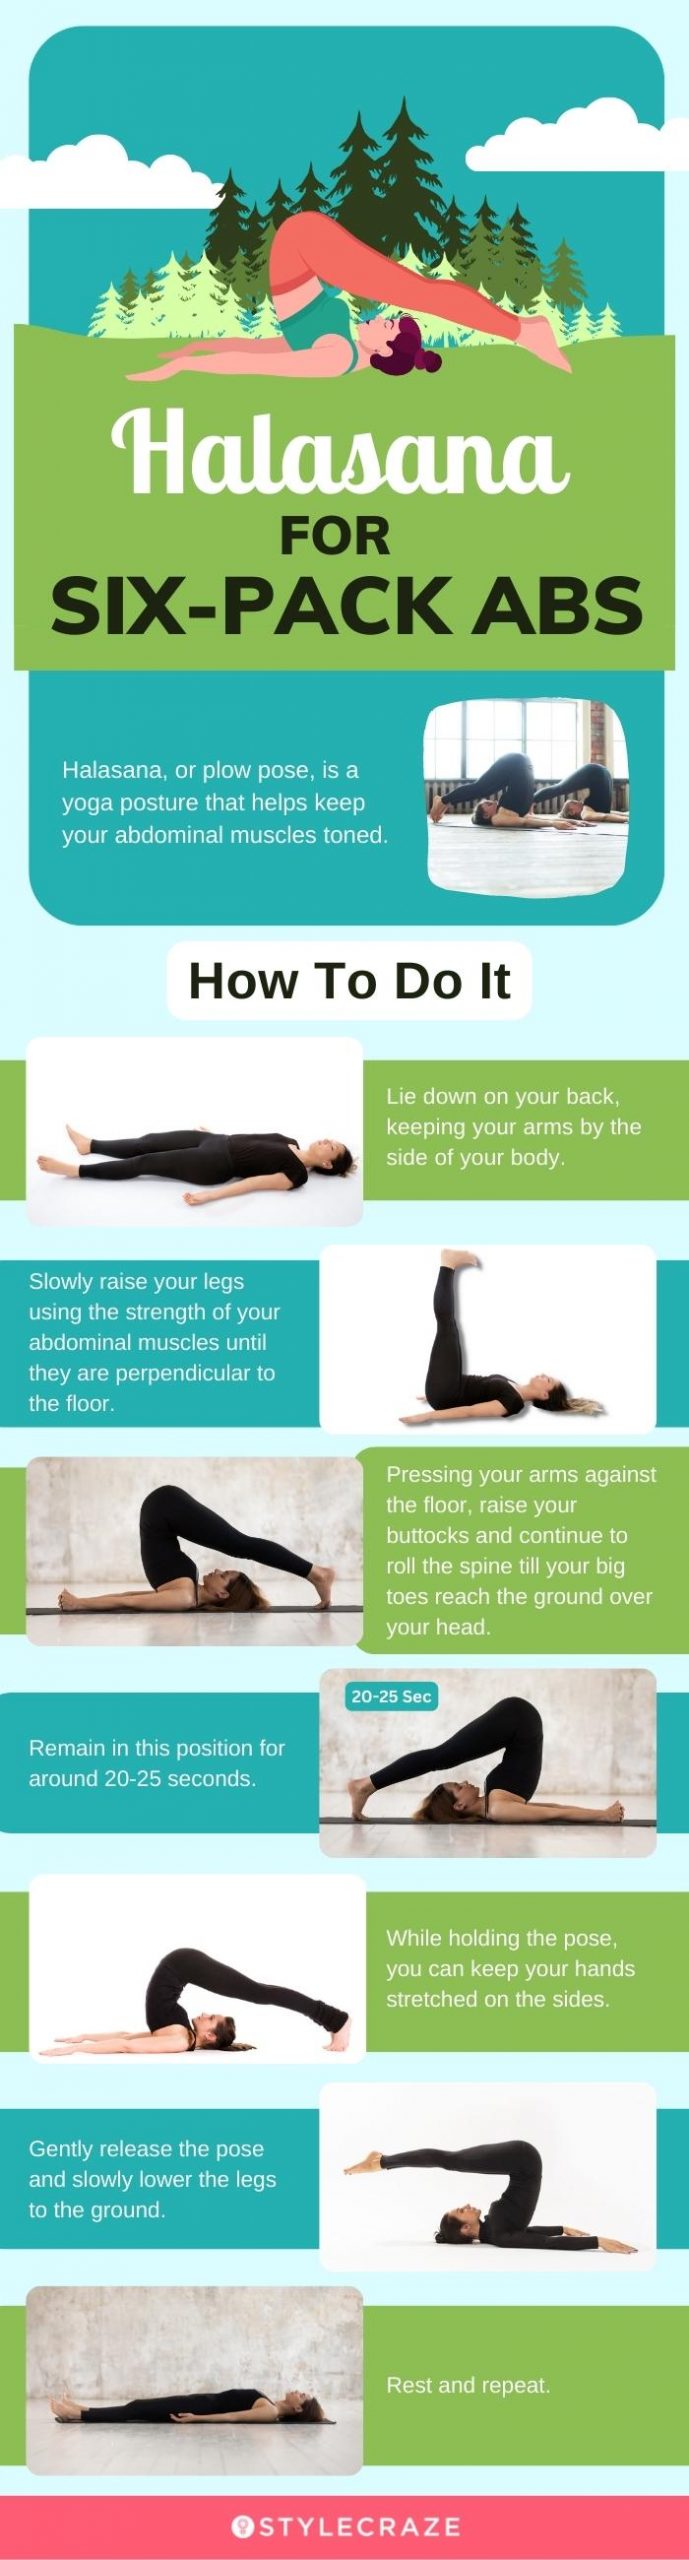 halasana for six pack abs(infographic)